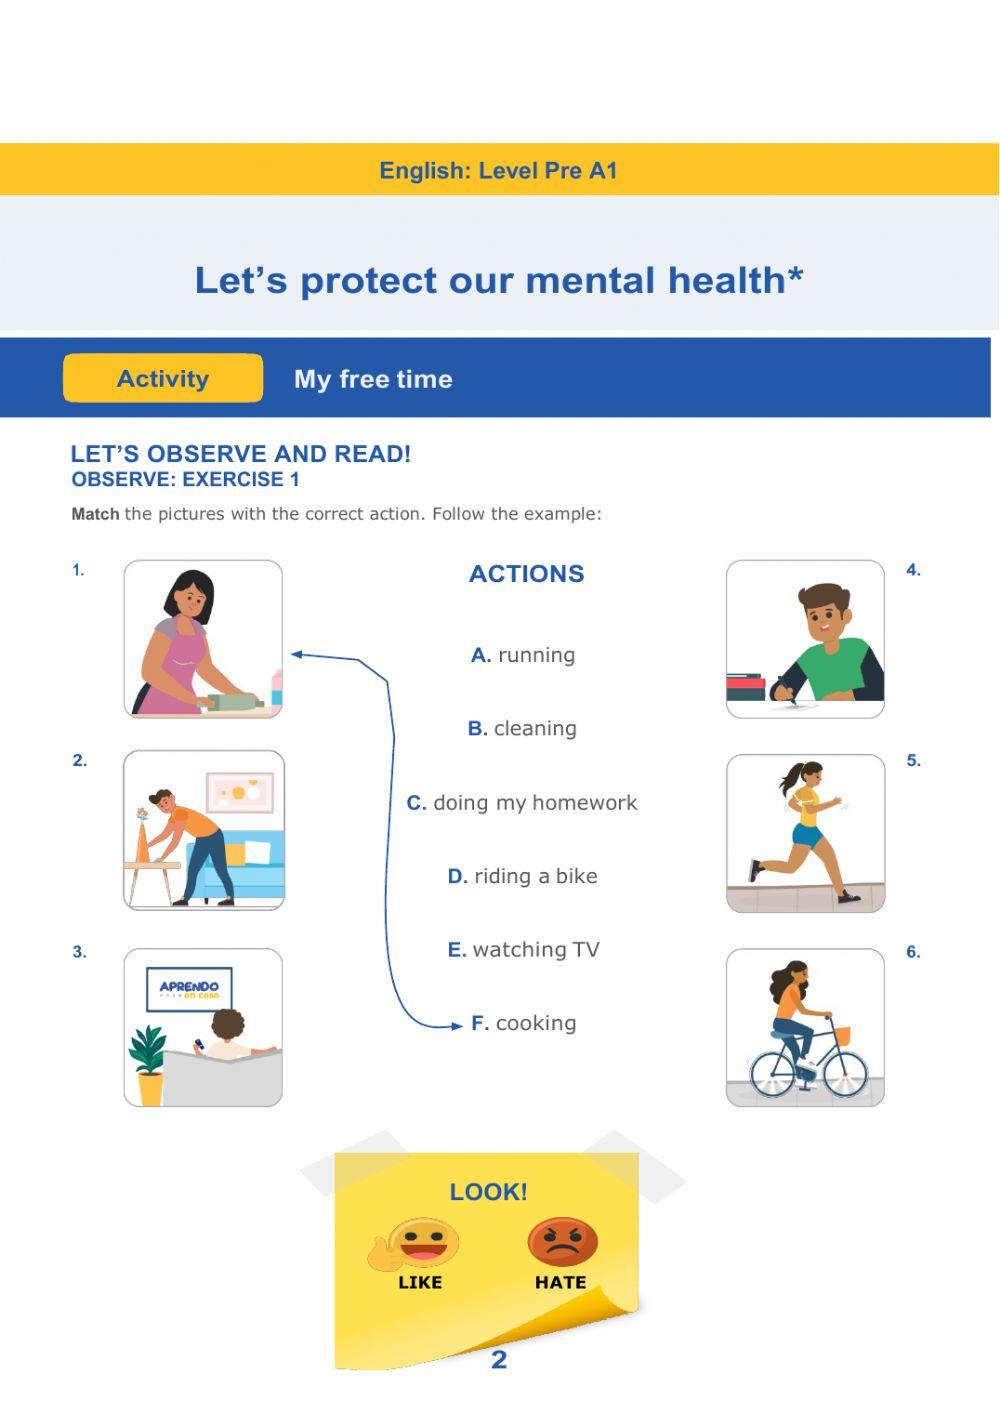 Let’s protect our mental health